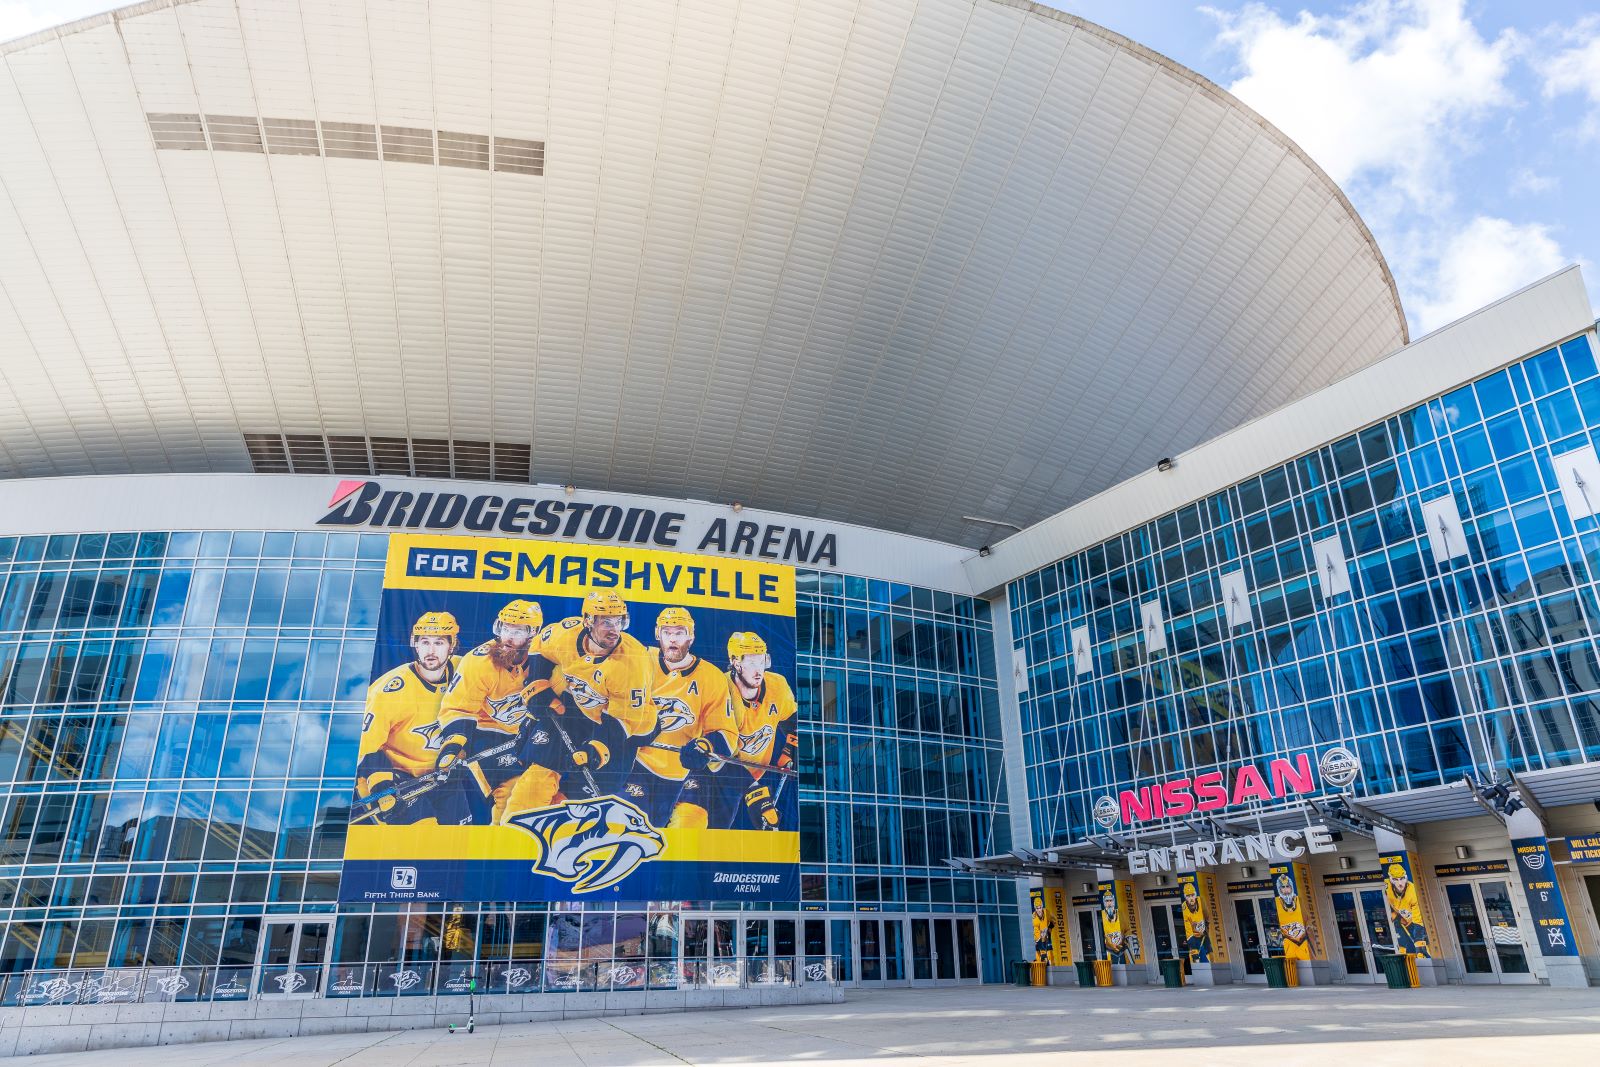 <p class="wp-caption-text">Image Credit: Shutterstock / Joseph Hendrickson</p>  <p>Cheer on the home team at a Nashville Predators hockey game. Experience the excitement of live NHL action at the Bridgestone Arena, located in the heart of downtown Nashville.</p>